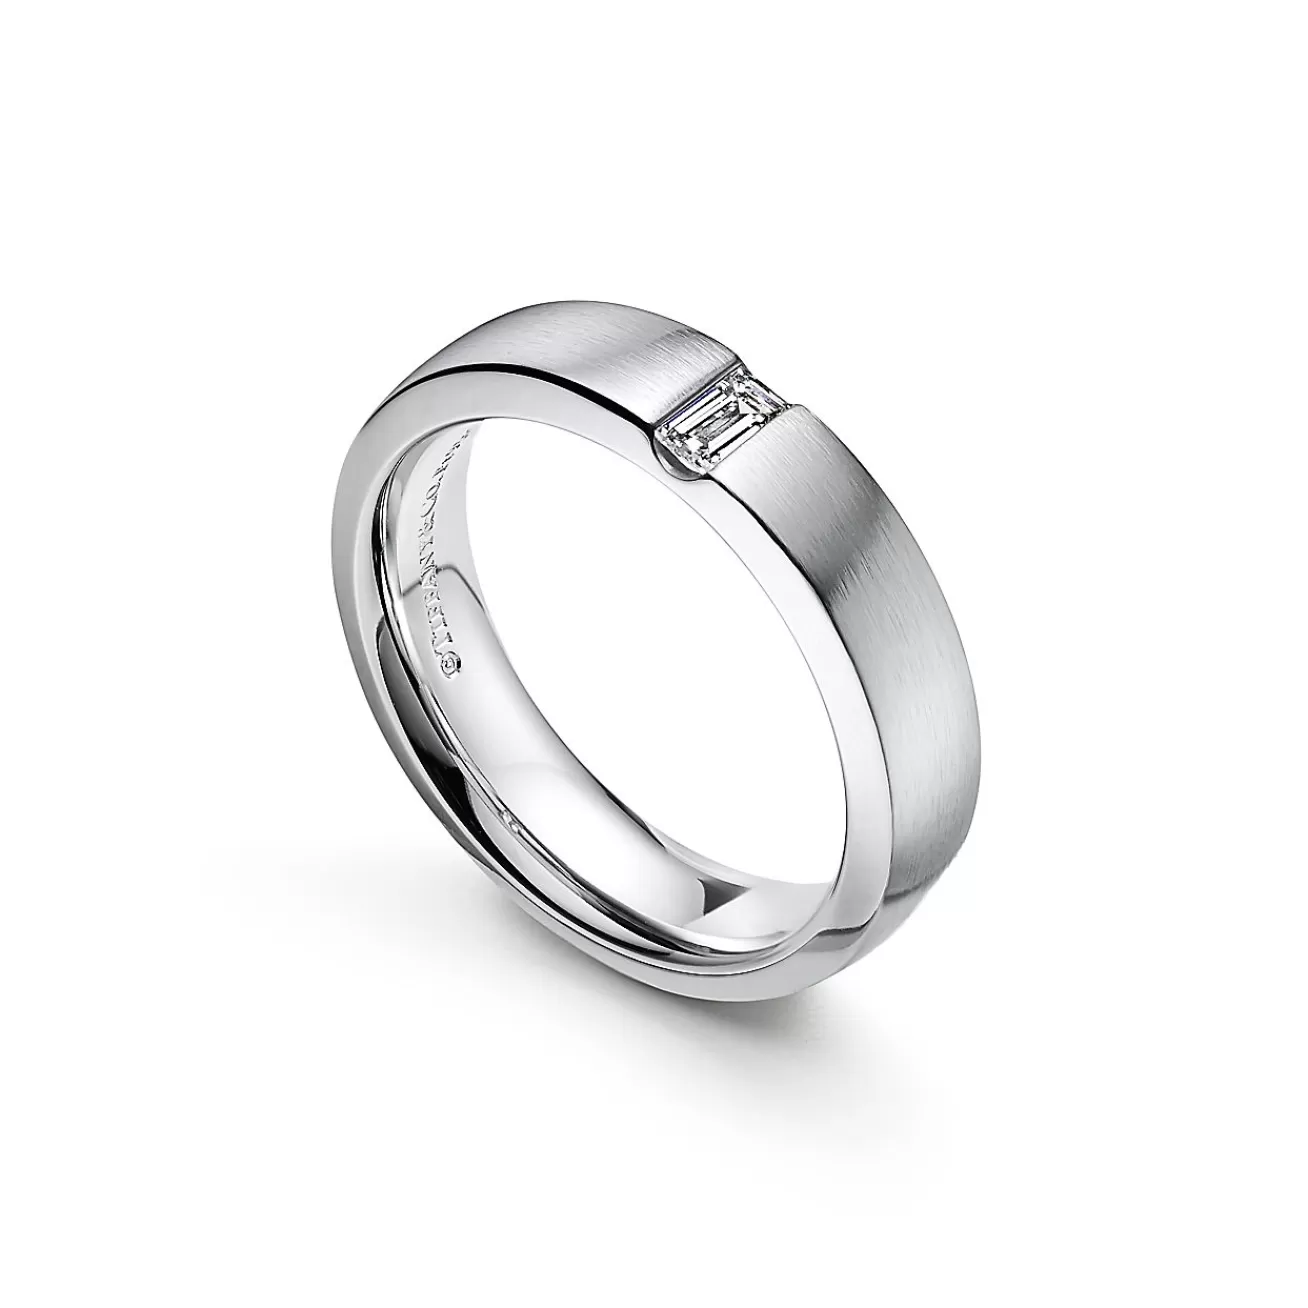 Tiffany & Co. The Charles Tiffany Setting Satin Finish Ring in Platinum with a Diamond, 5 mm | ^ Rings | Platinum Jewelry